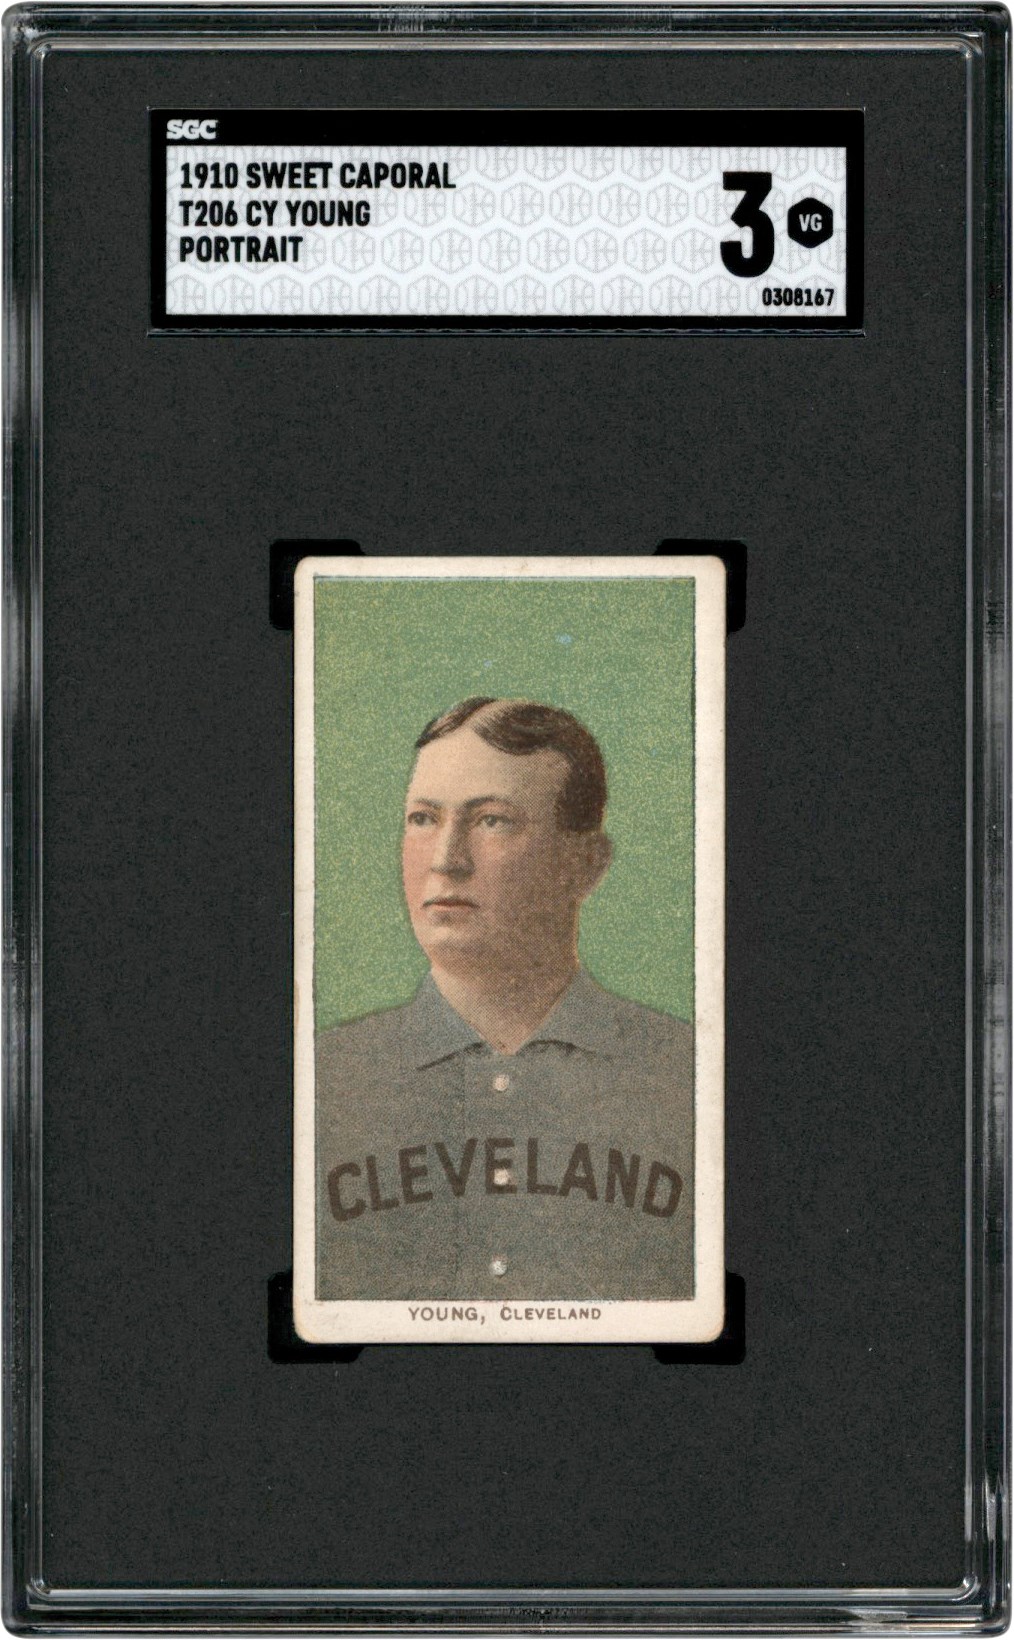 1909-1911 T206 Cy Young Sweet Caporal (Portrait) SGC VG 3